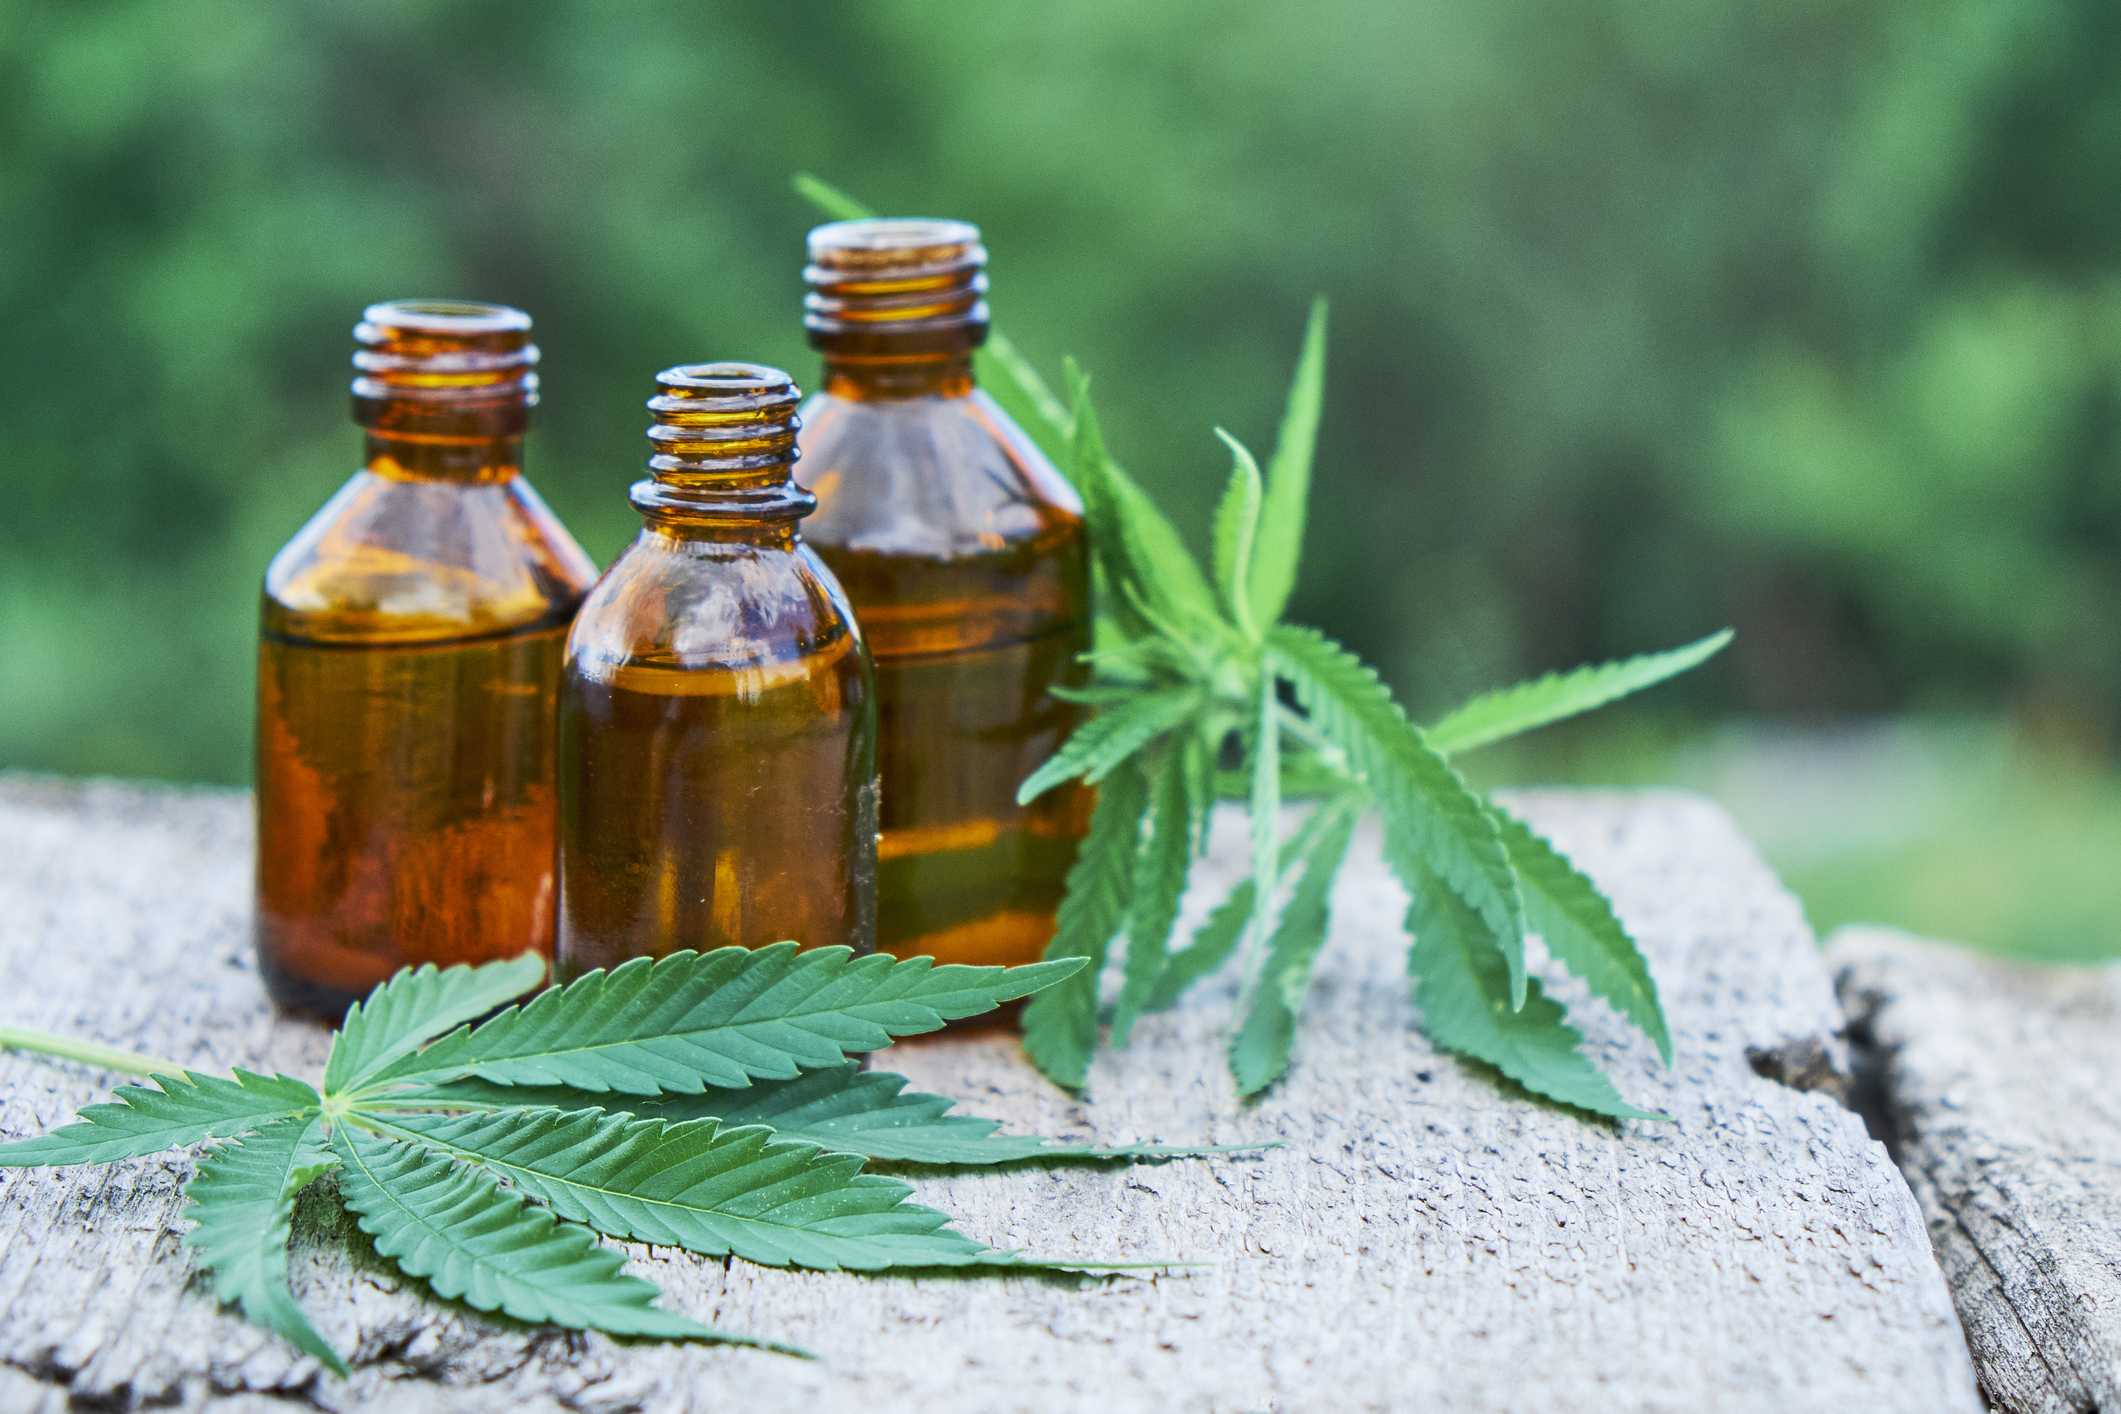 How Soon Does Cbd Oil Take To Work - Cbd|Oil|Cannabidiol|Products|View|Abstract|Effects|Hemp|Cannabis|Product|Thc|Pain|People|Health|Body|Plant|Cannabinoids|Medications|Oils|Drug|Benefits|System|Study|Marijuana|Anxiety|Side|Research|Effect|Liver|Quality|Treatment|Studies|Epilepsy|Symptoms|Gummies|Compounds|Dose|Time|Inflammation|Bottle|Cbd Oil|View Abstract|Side Effects|Cbd Products|Endocannabinoid System|Multiple Sclerosis|Cbd Oils|Cbd Gummies|Cannabis Plant|Hemp Oil|Cbd Product|Hemp Plant|United States|Cytochrome P450|Many People|Chronic Pain|Nuleaf Naturals|Royal Cbd|Full-Spectrum Cbd Oil|Drug Administration|Cbd Oil Products|Medical Marijuana|Drug Test|Heavy Metals|Clinical Trial|Clinical Trials|Cbd Oil Side|Rating Highlights|Wide Variety|Animal Studies